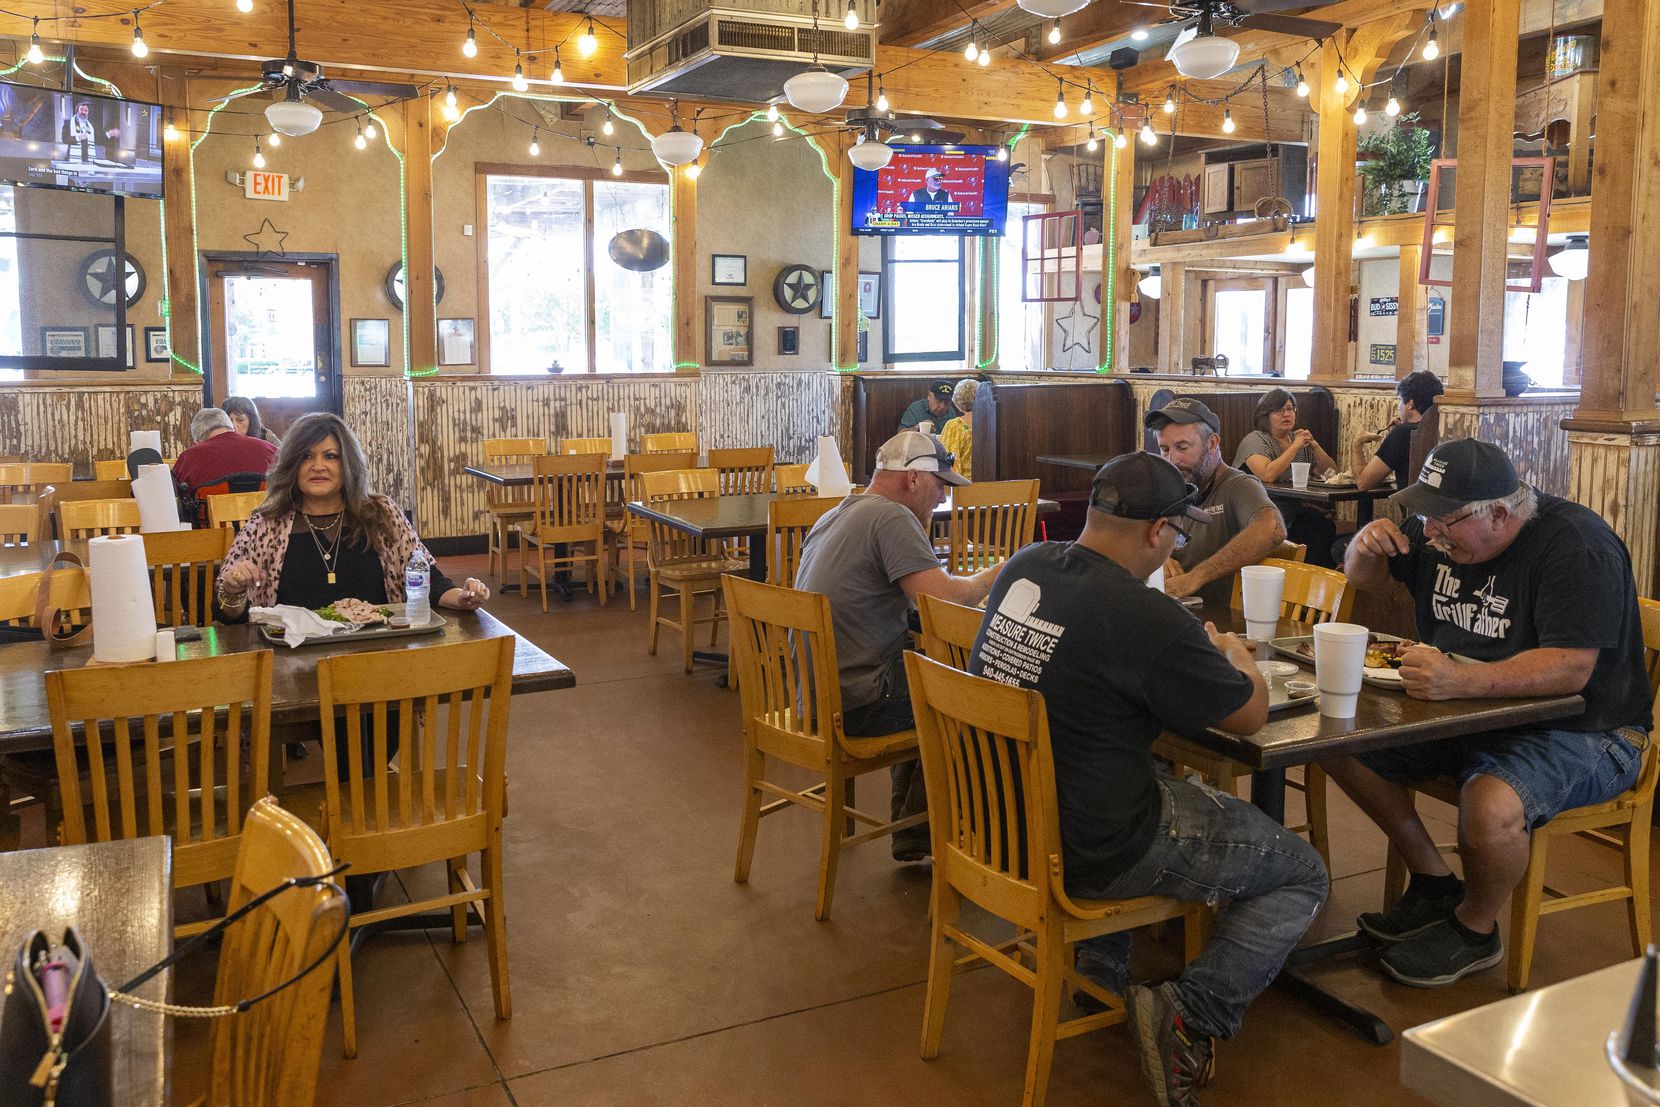 Customers eat during the lunch hour at Baker's Ribs in Weatherford.